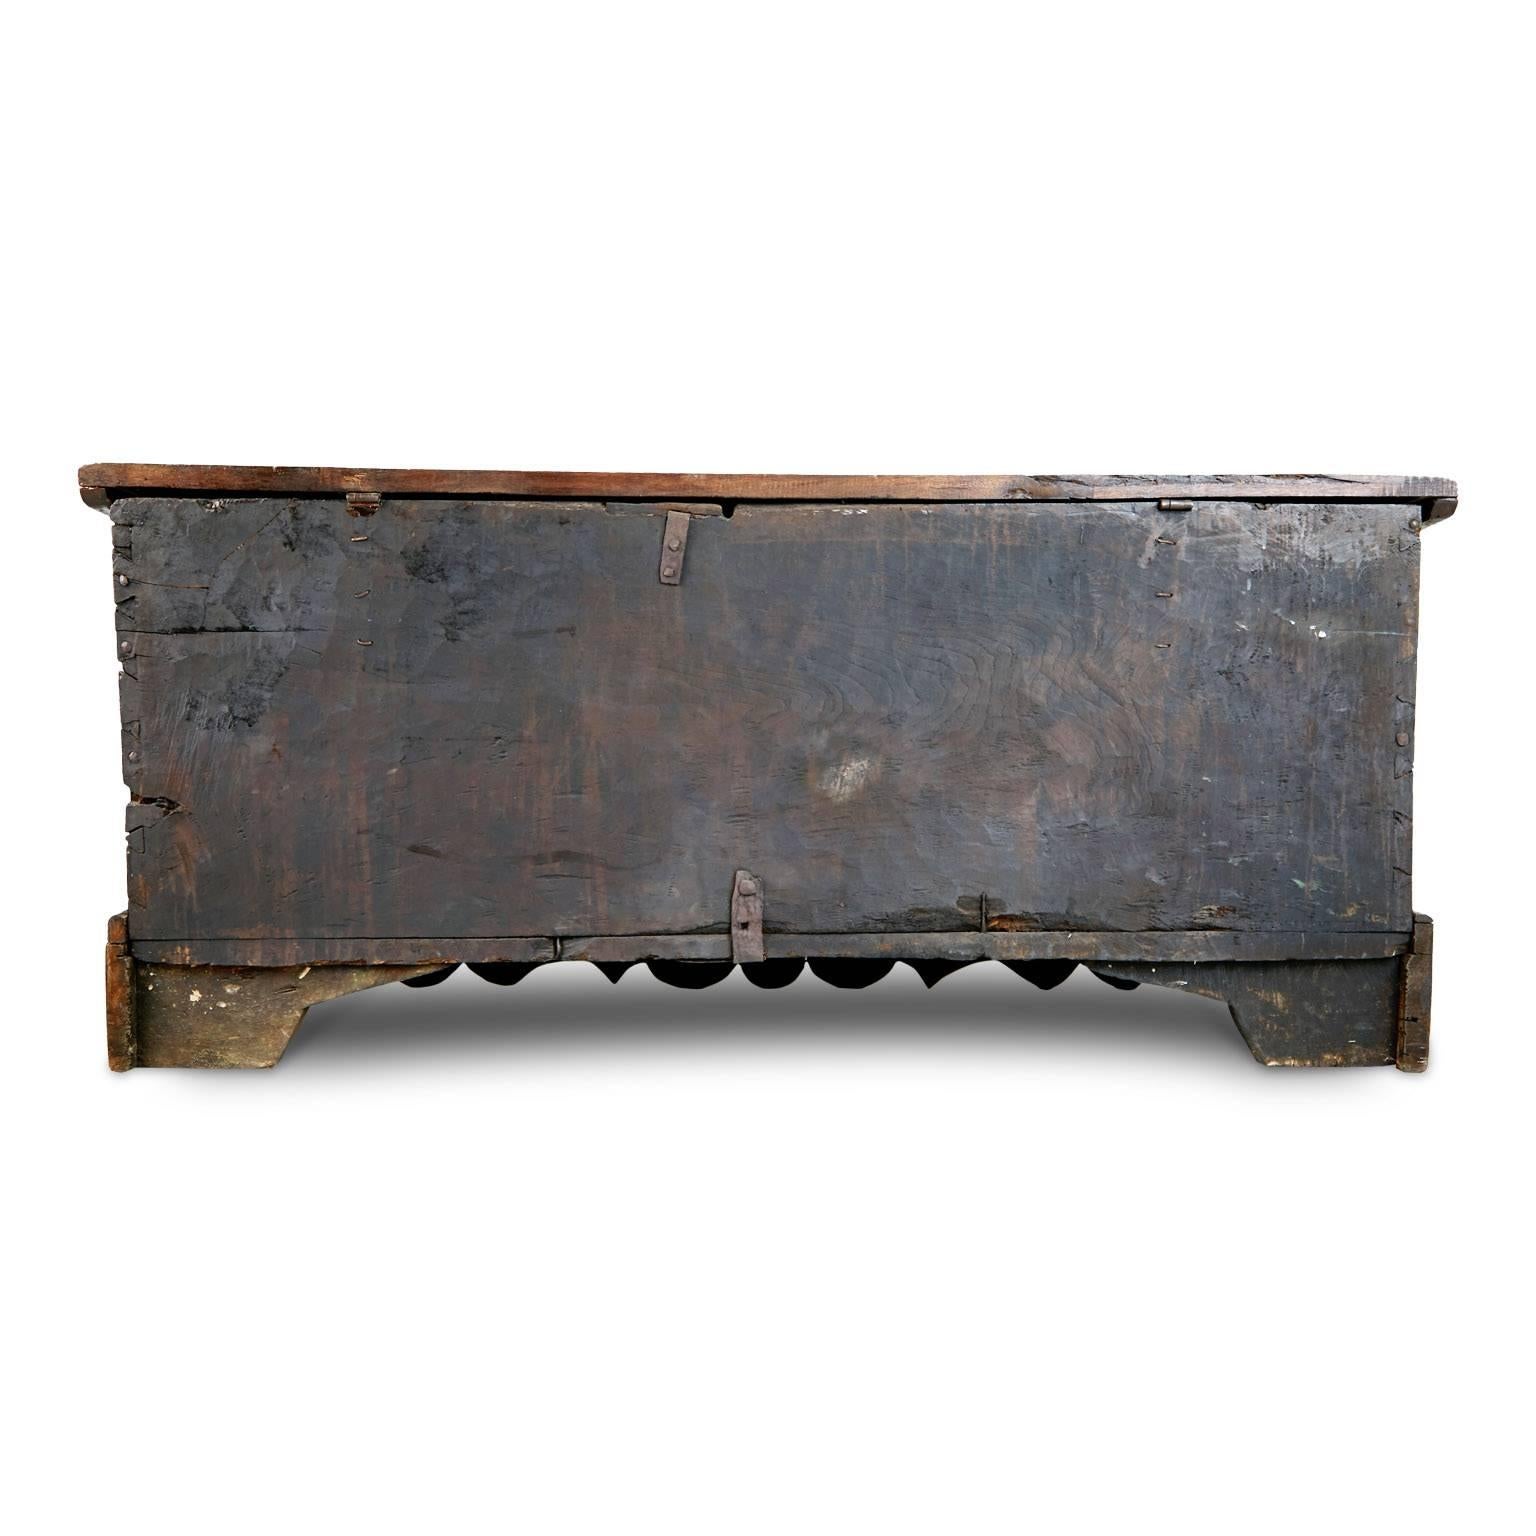 Add a real show stopper to your interior with this extremely large English Carolean chest or coffer, which can be used for blankets, bedding or other storage or display purposes. This striking piece is fabricated from hand-carved oak and elm and is